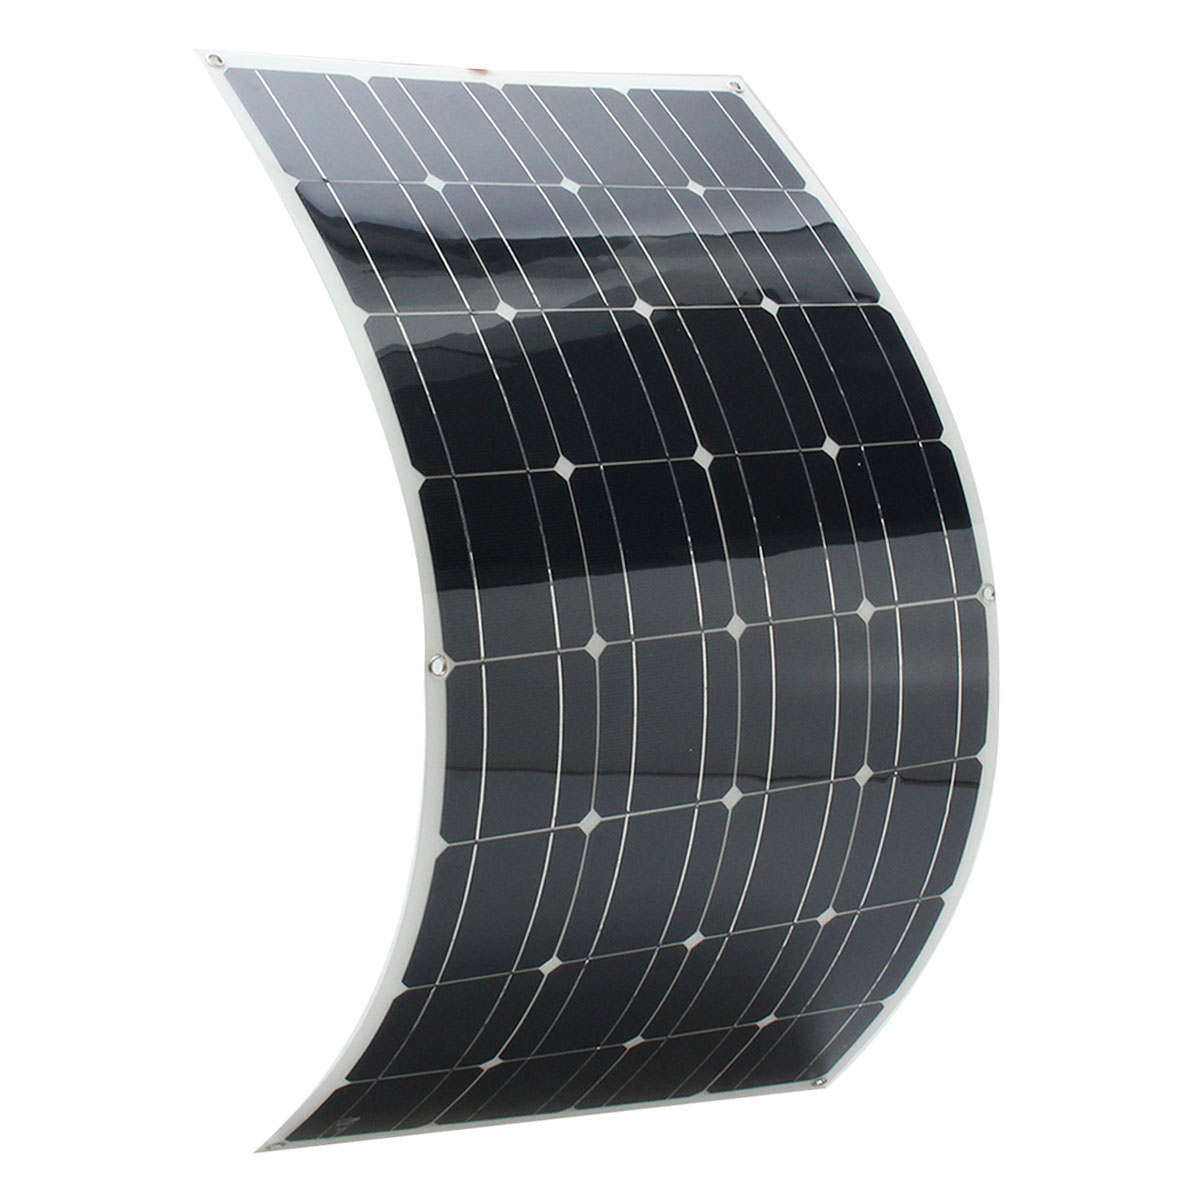 Elfeland® SP-38 18V 100W 1050x540x2.5mm Flexible Solar Panel With 1.5m Cable 6